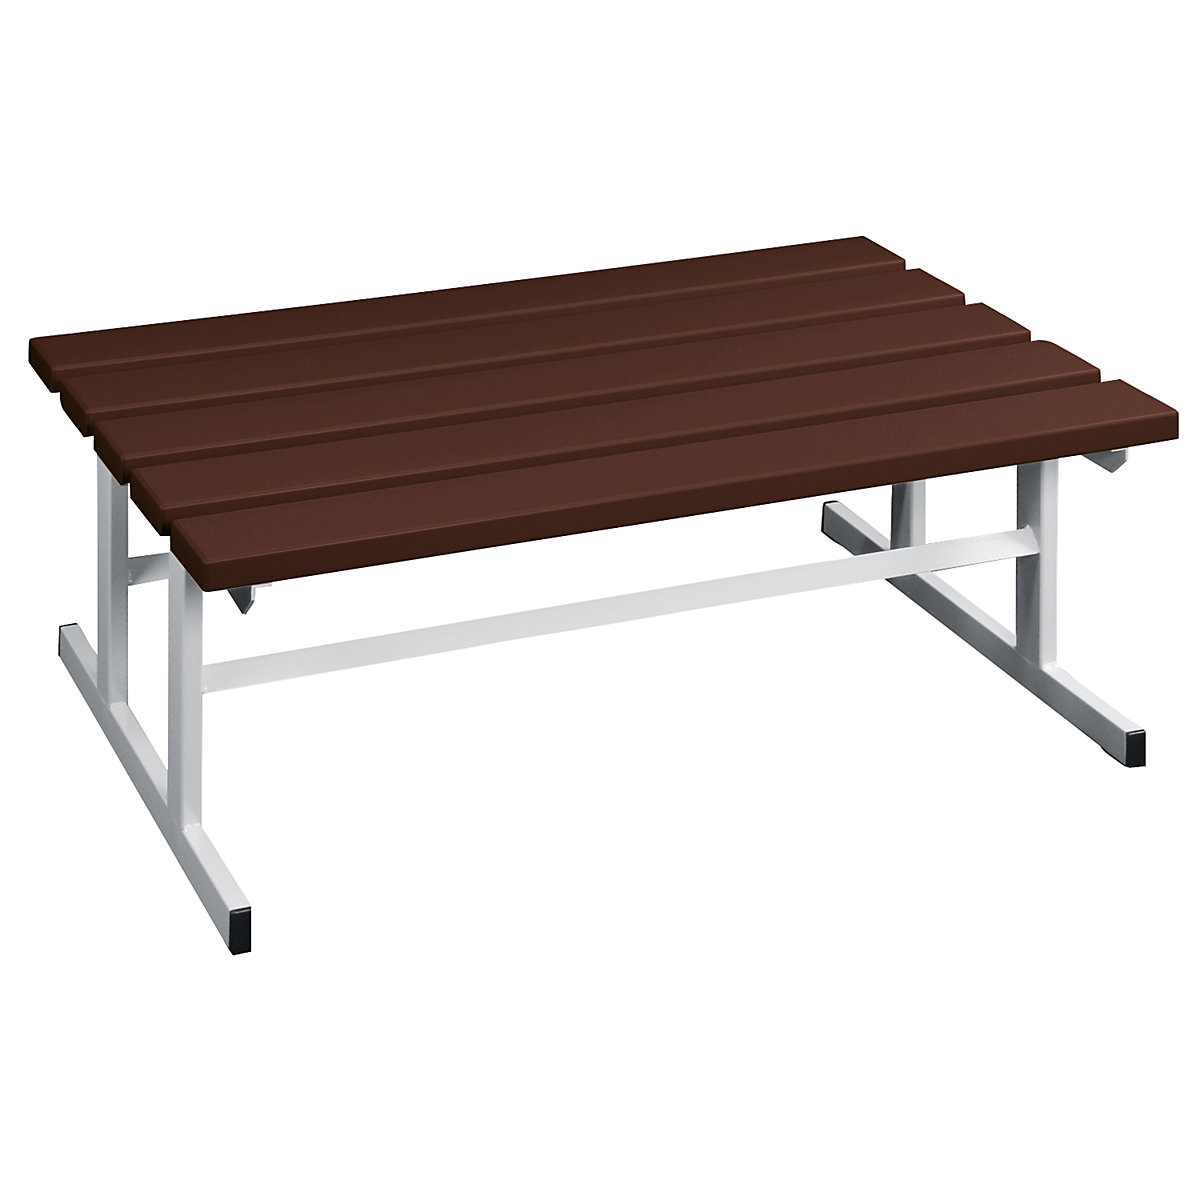 Wolf – Cloakroom bench, double sided seat, brown, 1000 mm length